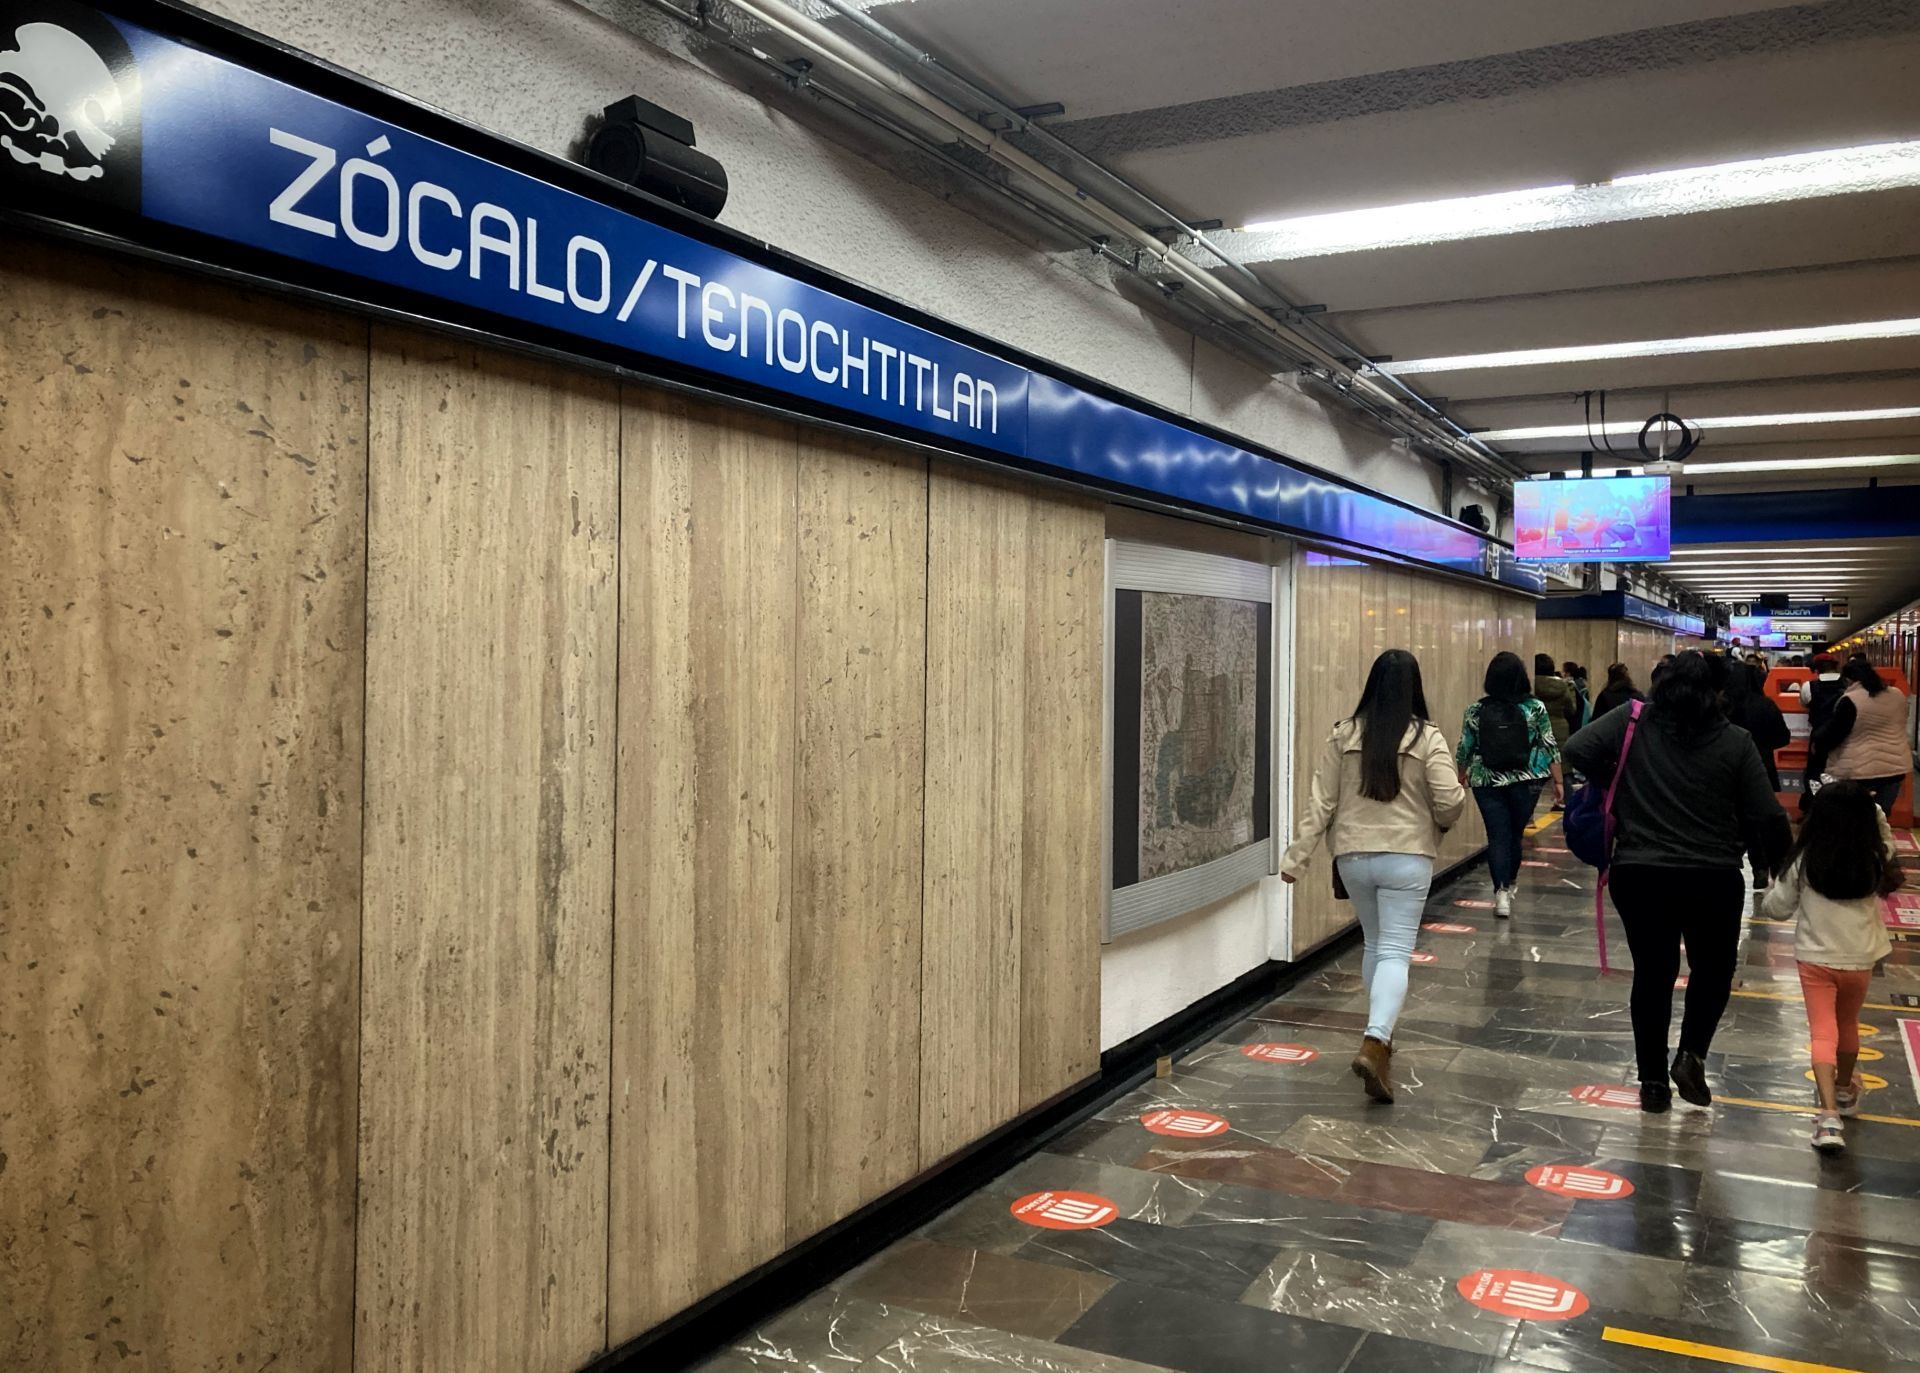 Zocalo and Audtorio stations will be closed until January 11